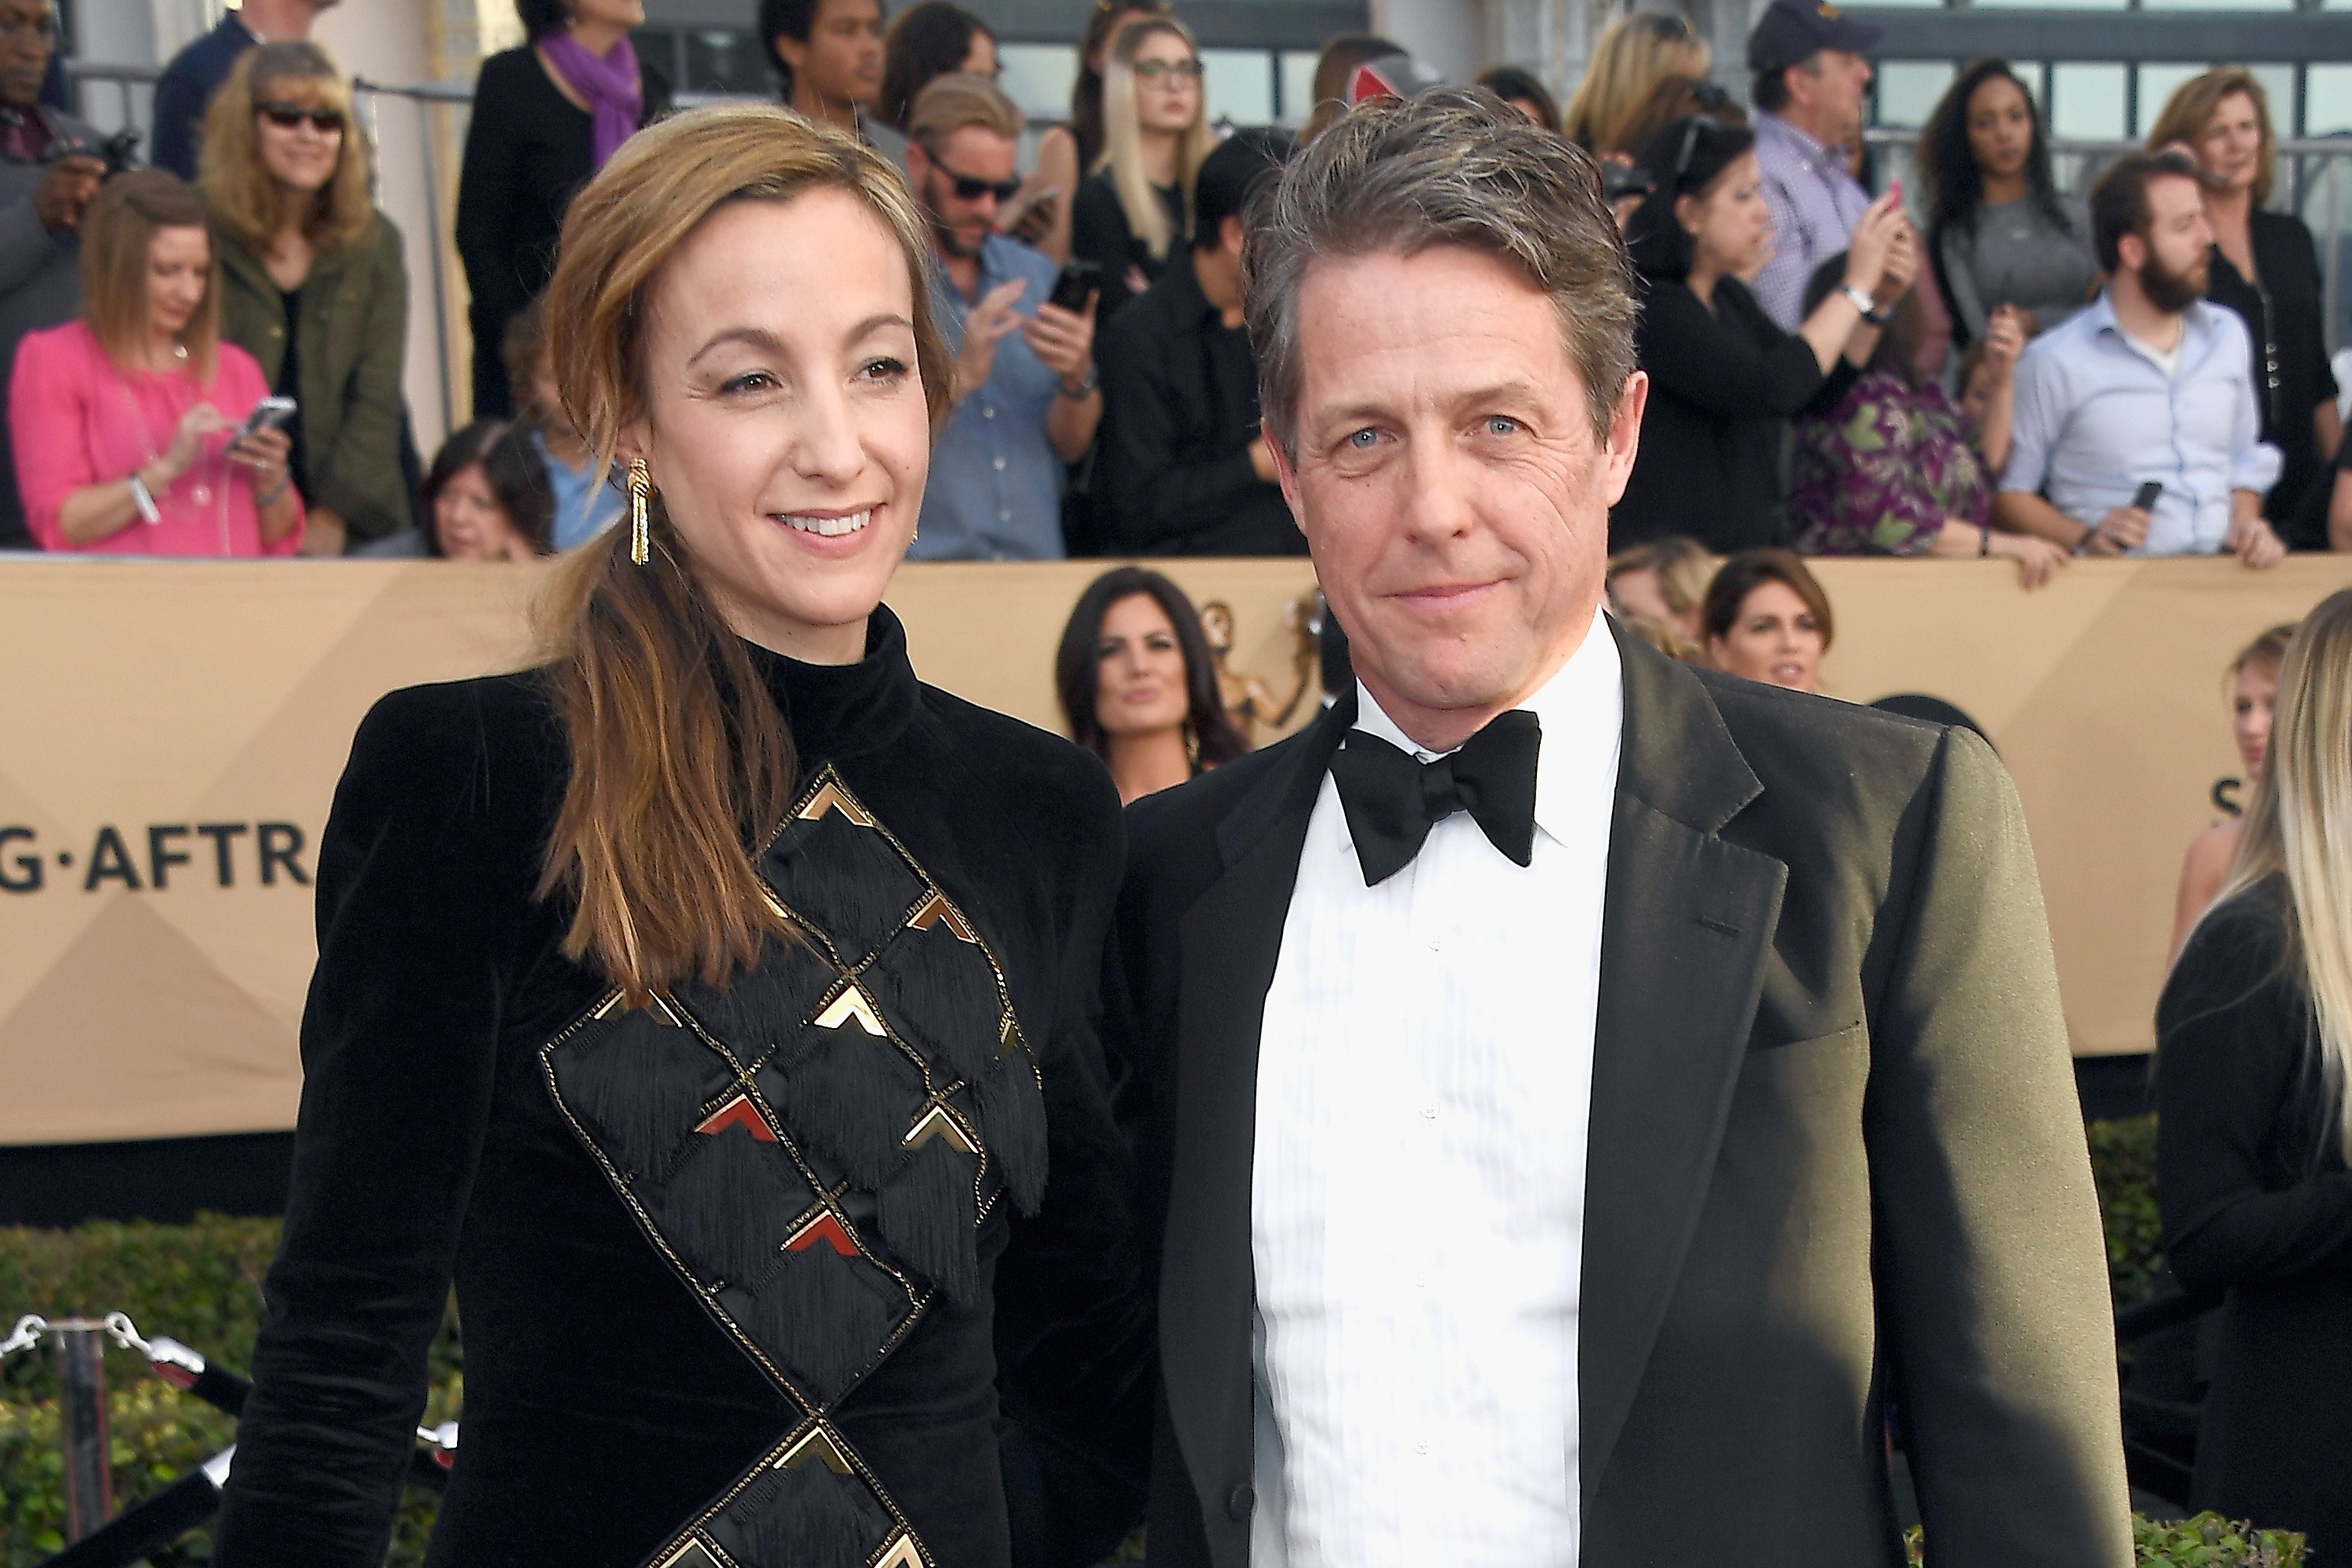 Anna Eberstein and her husband Hugh Grant at the 23rd Annual Screen Actors Guild Awards on January 29, 2017, in Los Angeles, California. | Source: Getty Images